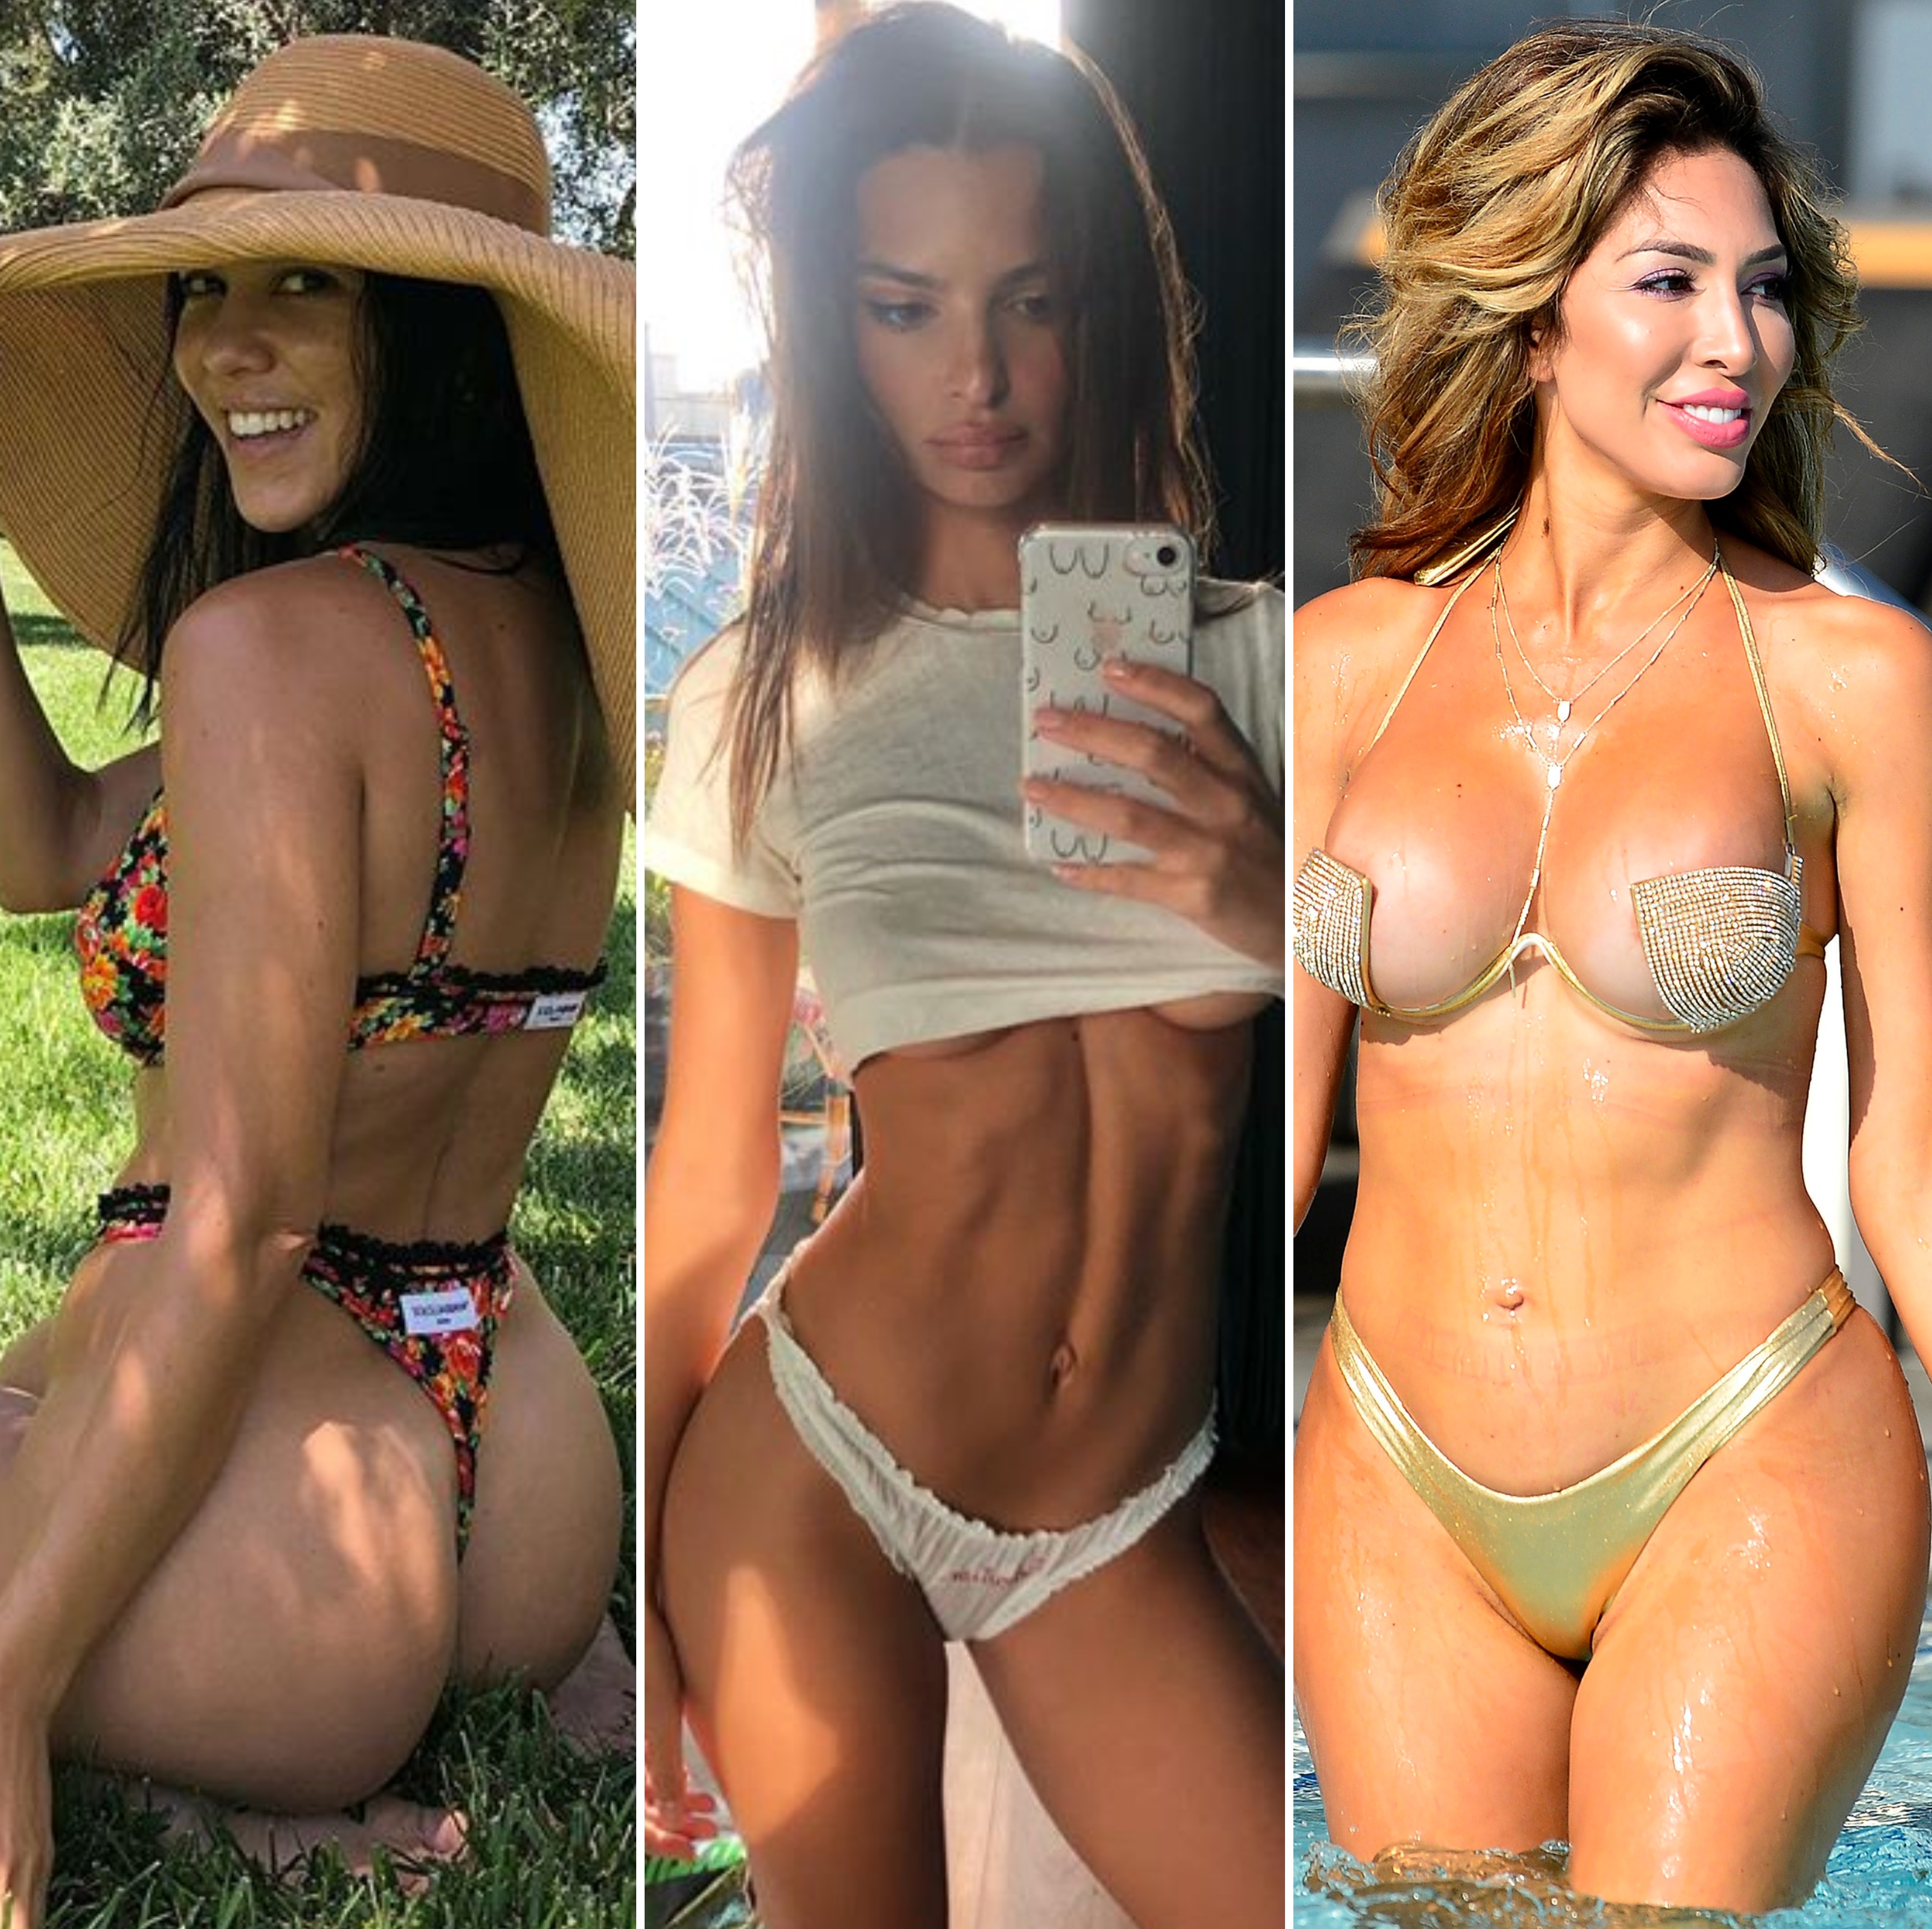 Stars Who Love Being Naked Celebs Showing Skin, Going Nude pic image